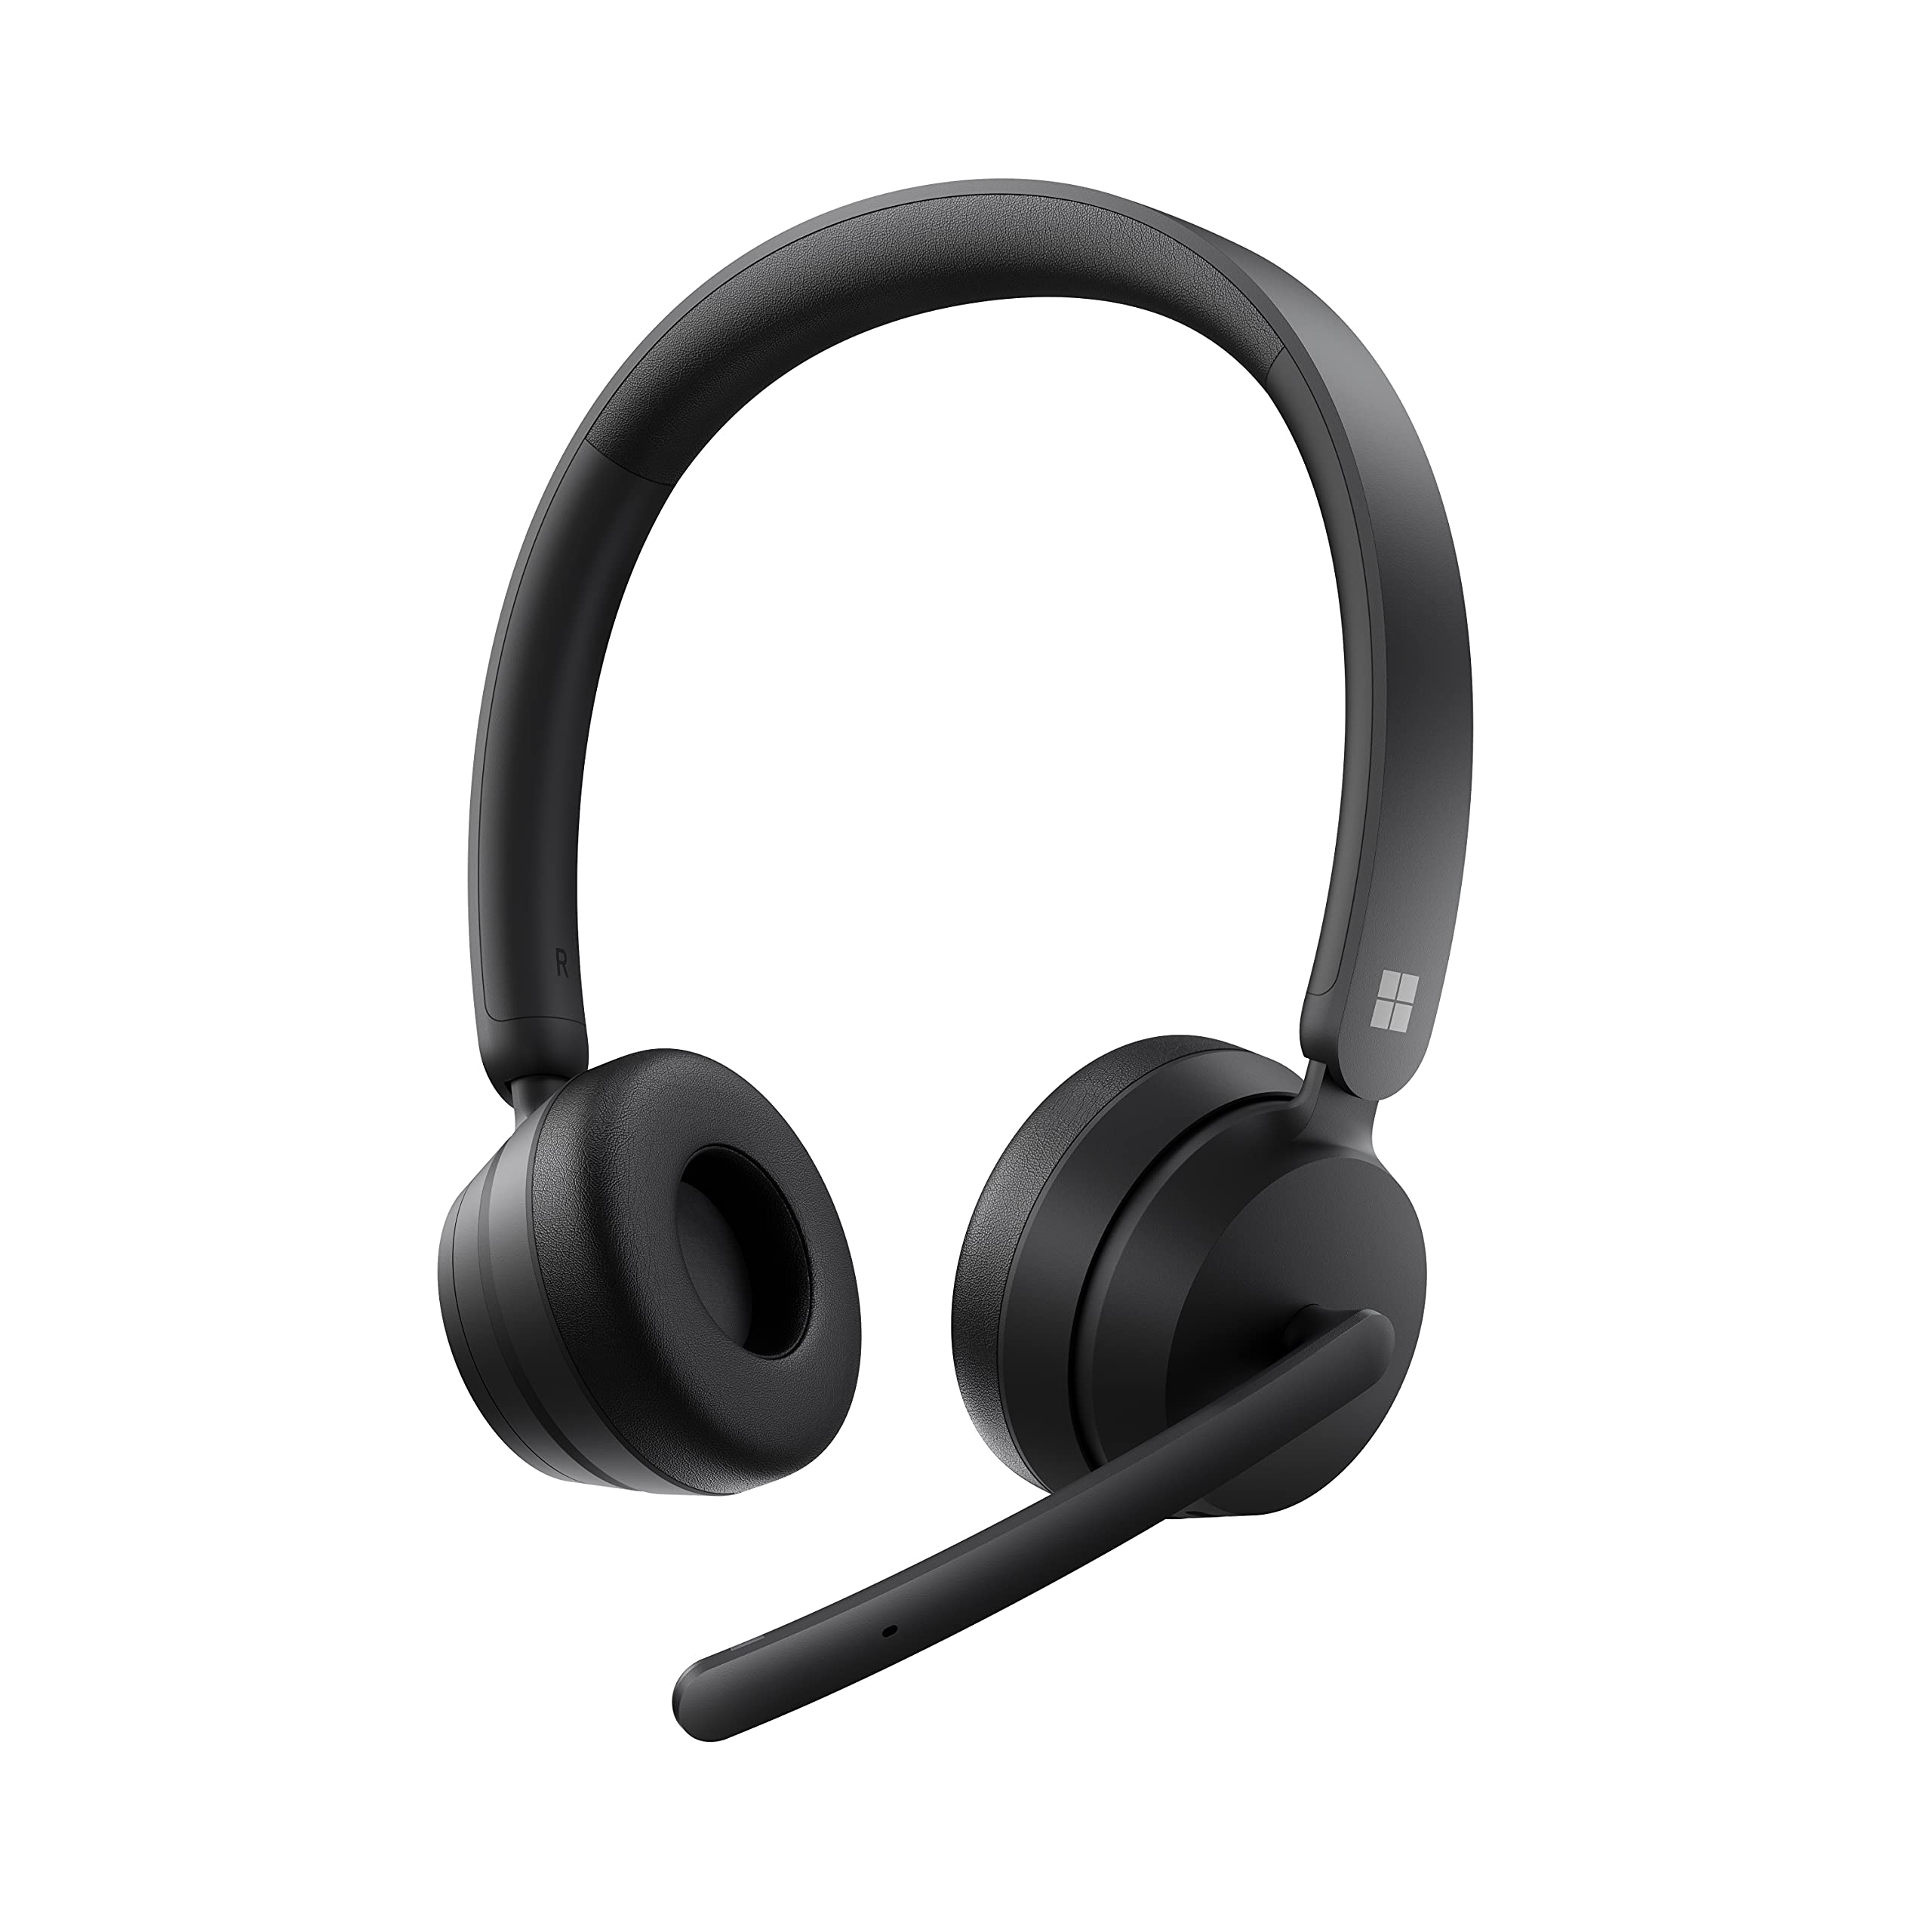 Microsoft Modern - Wireless Headset,Comfortable Stereo Headphones with Noise-Cancelling Microphone, USB-A dongle, On-Ear Controls, PC/Mac - Certified for Microsoft Teams